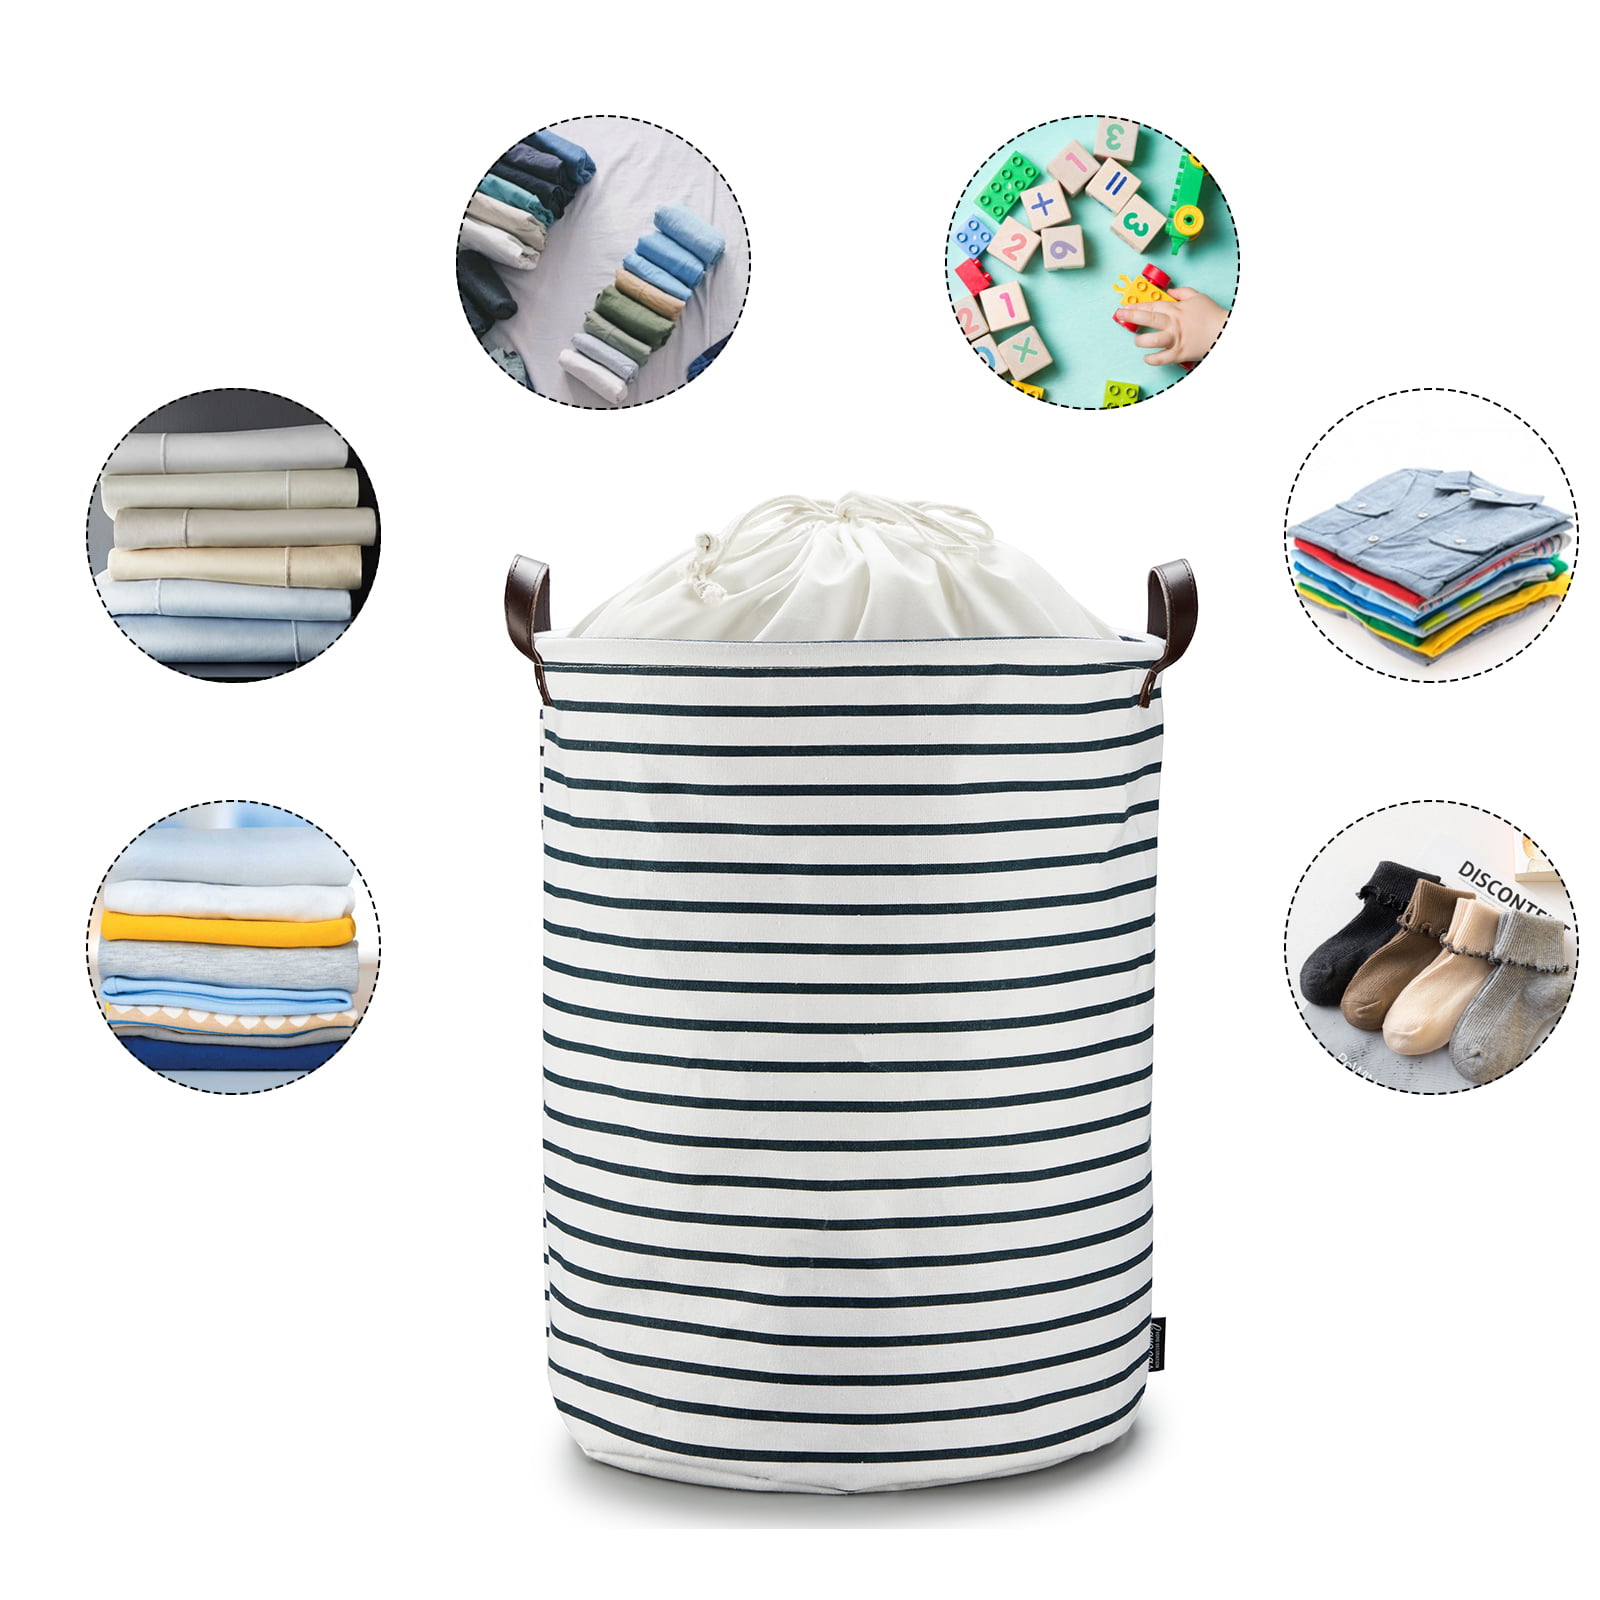 Caroeas 18.0-Inches Thicken Laundry Basket, Waterproof Large